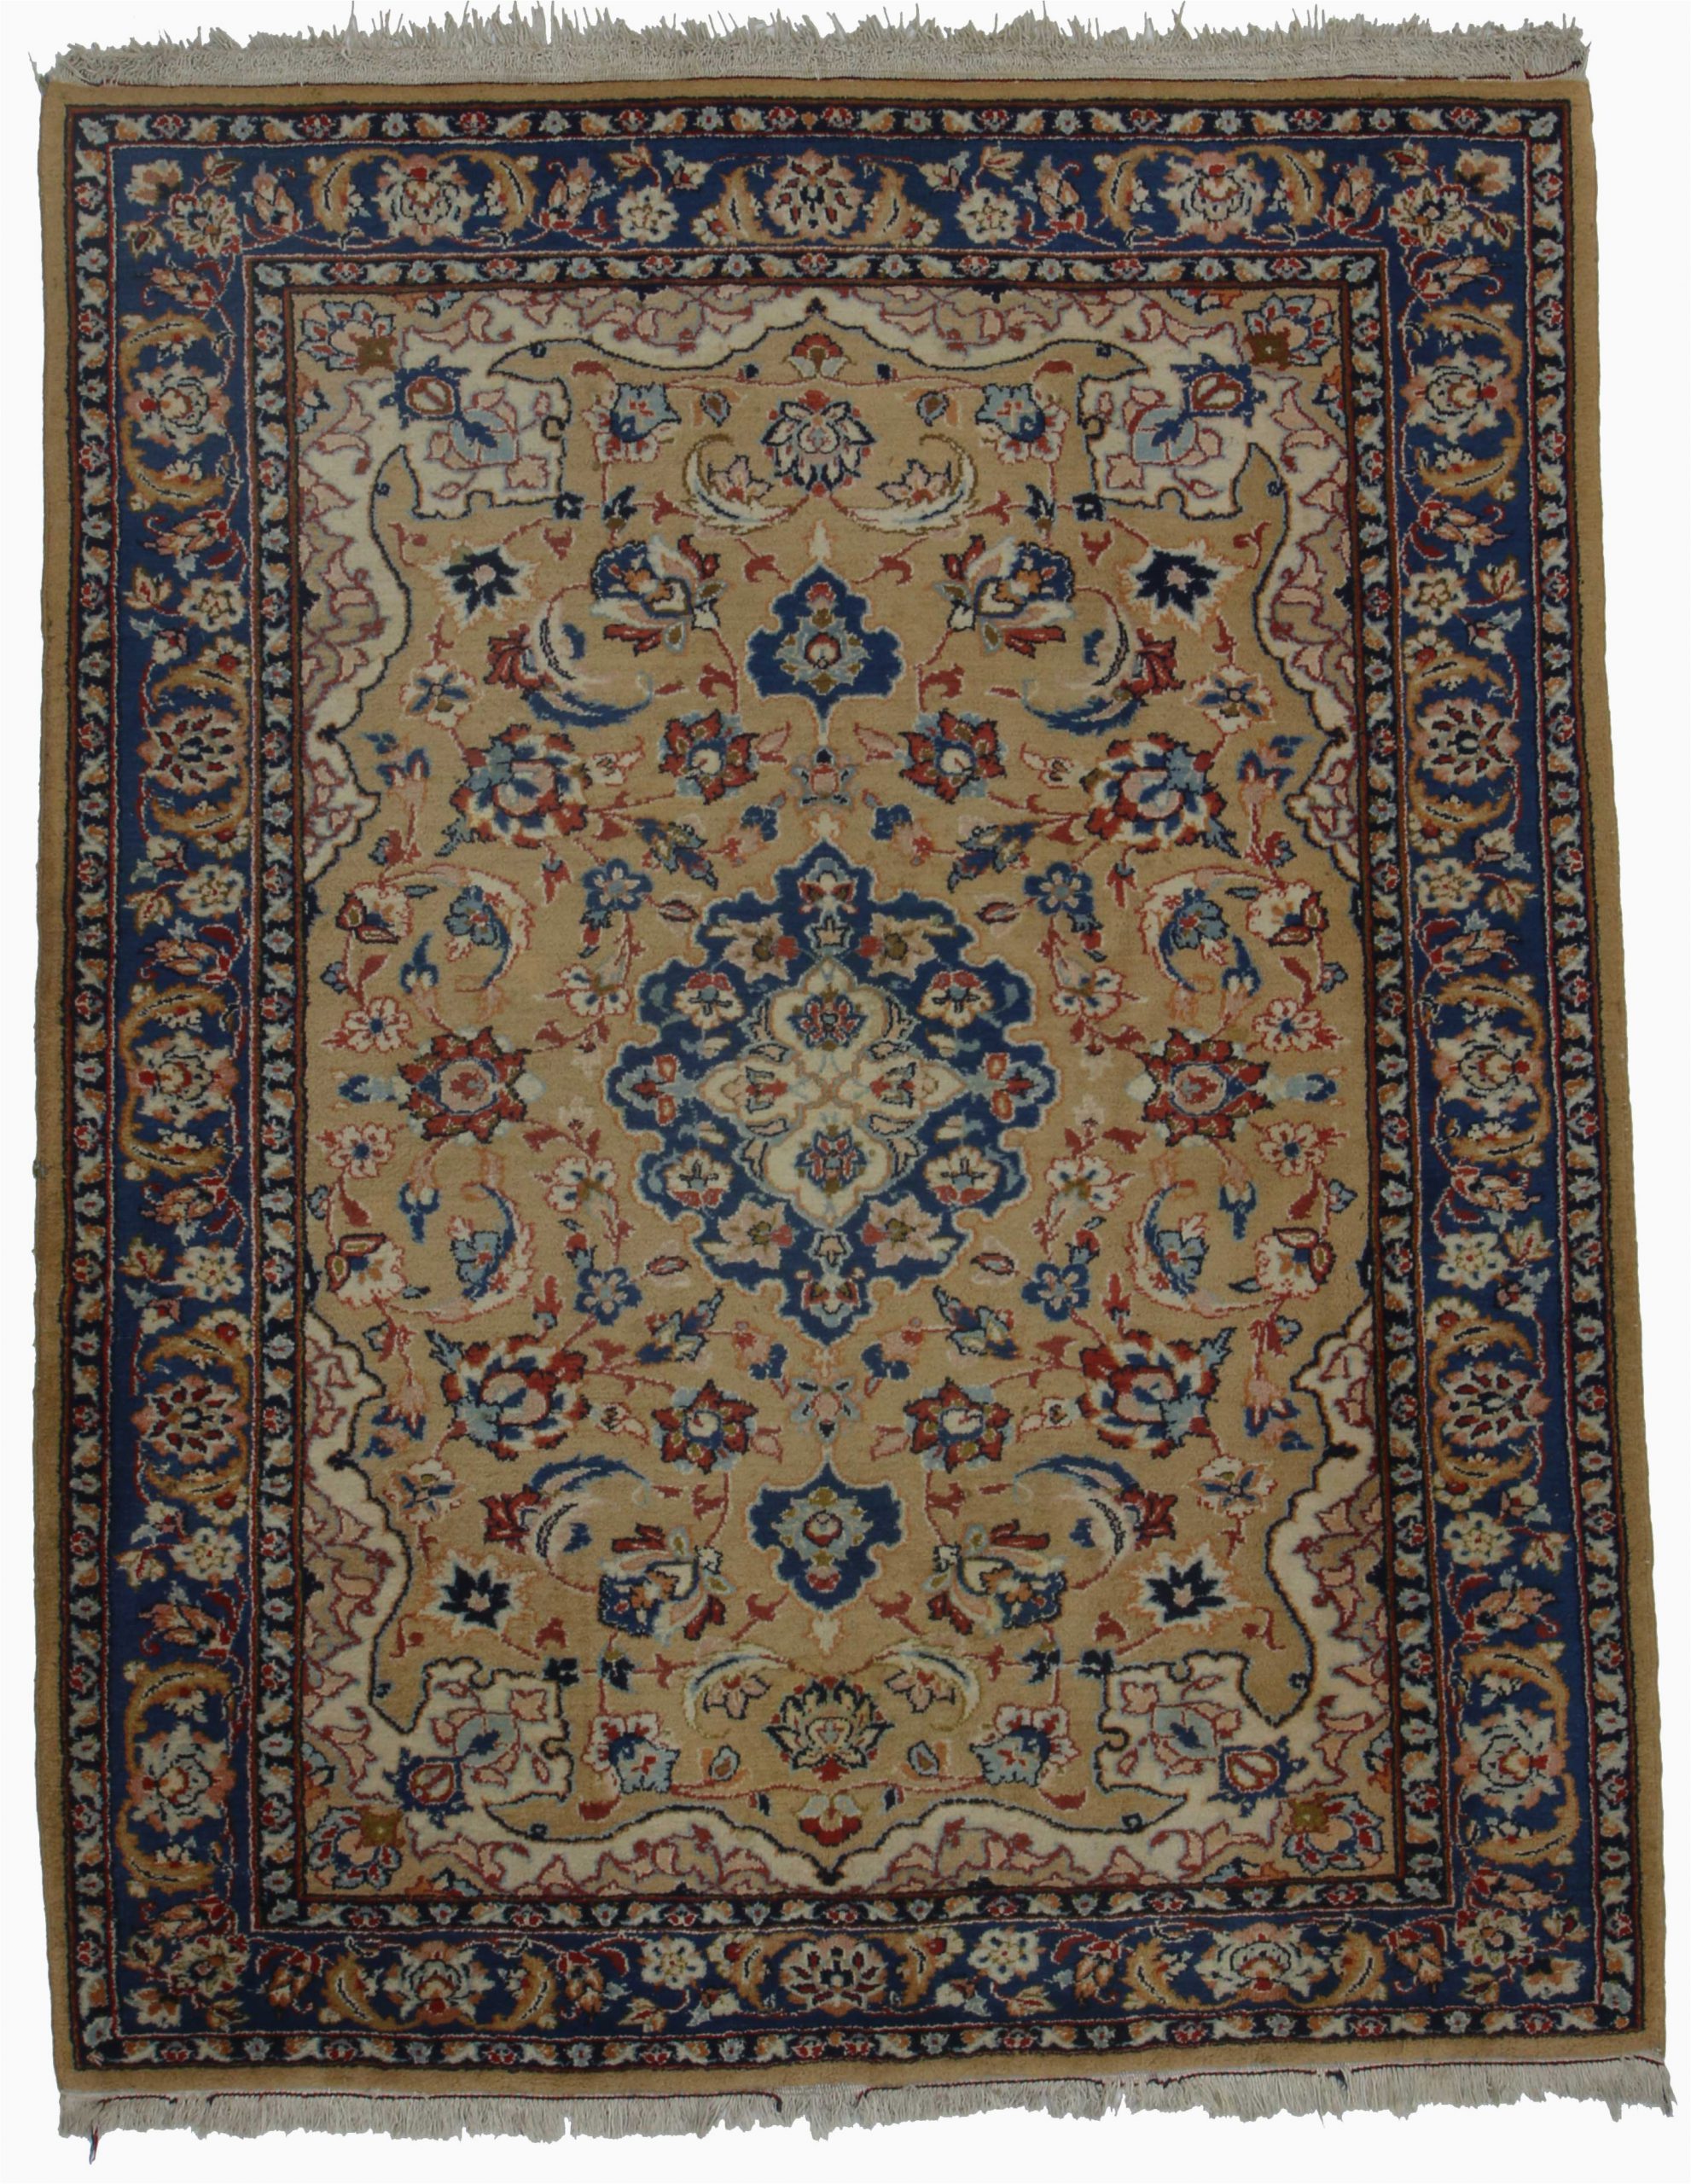 Blue Persian Rugs for Sale Persian isfahan 5 X 7 Rug 1376